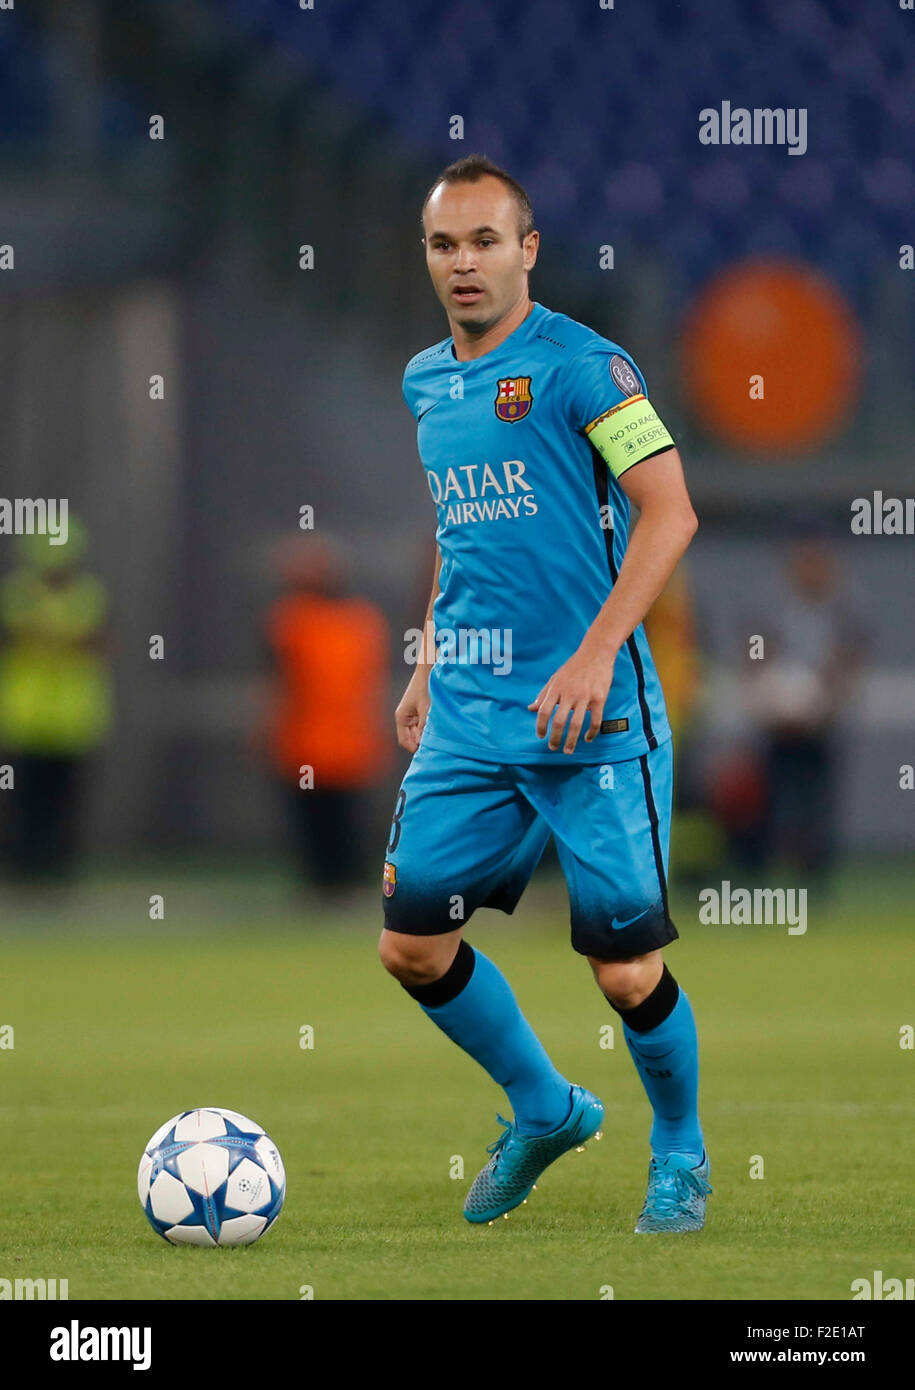 Rome, Italy. 16th Sep, 2015. Barcellona's Andreas Iniesta during the Champions League Group E soccer match against AS Roma   at the Olympic Stadium in Rome September 16, 2015 Credit:  agnfoto/Alamy Live News Stock Photo